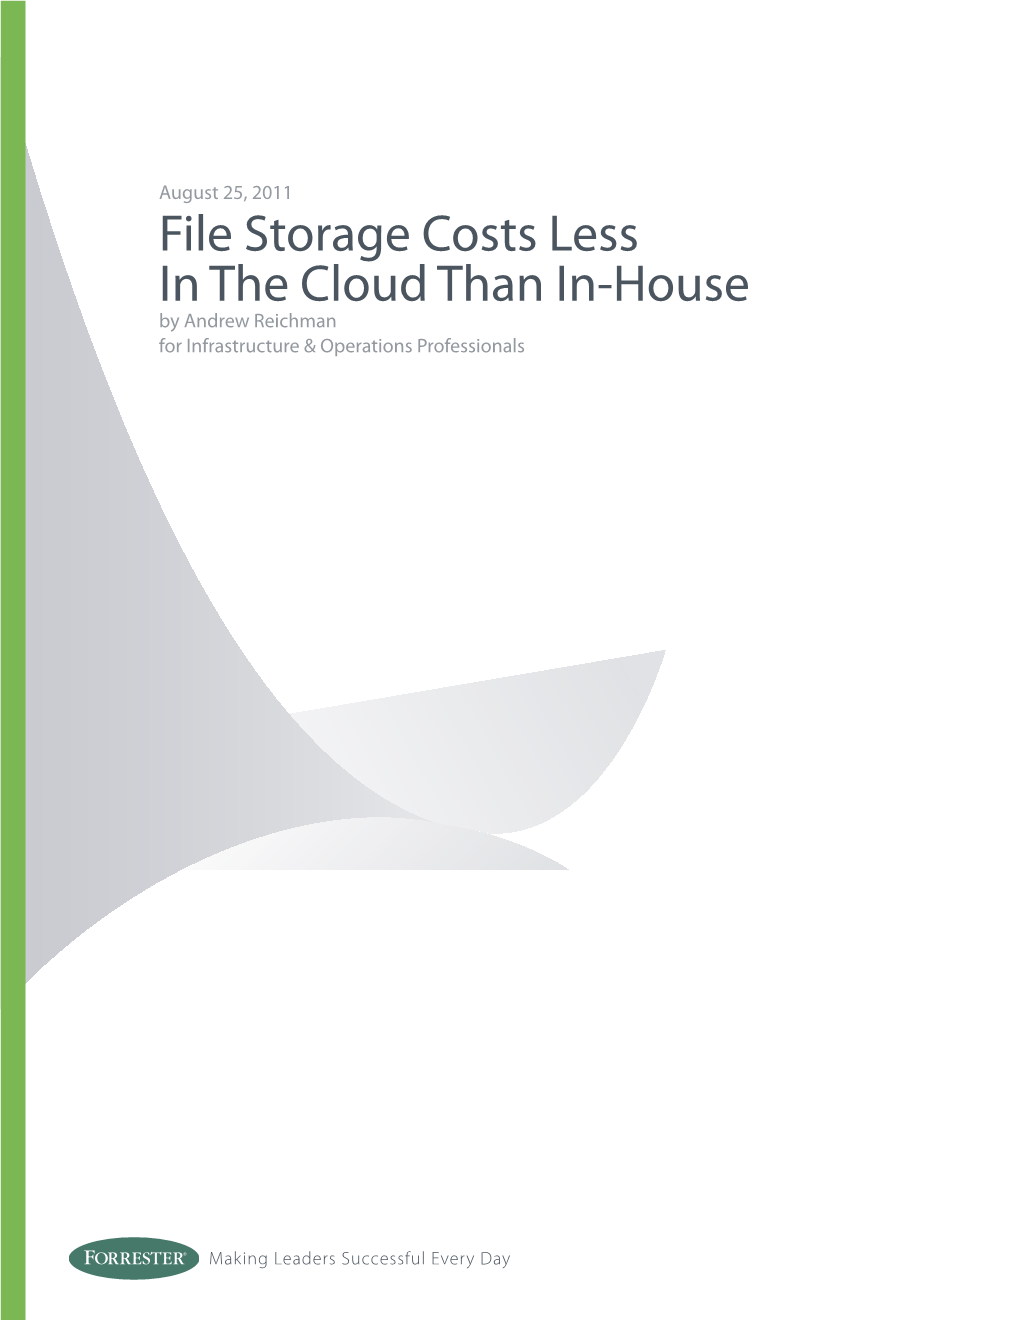 File Storage Costs Less in the Cloud Than In-House by Andrew Reichman for Infrastructure & Operations Professionals